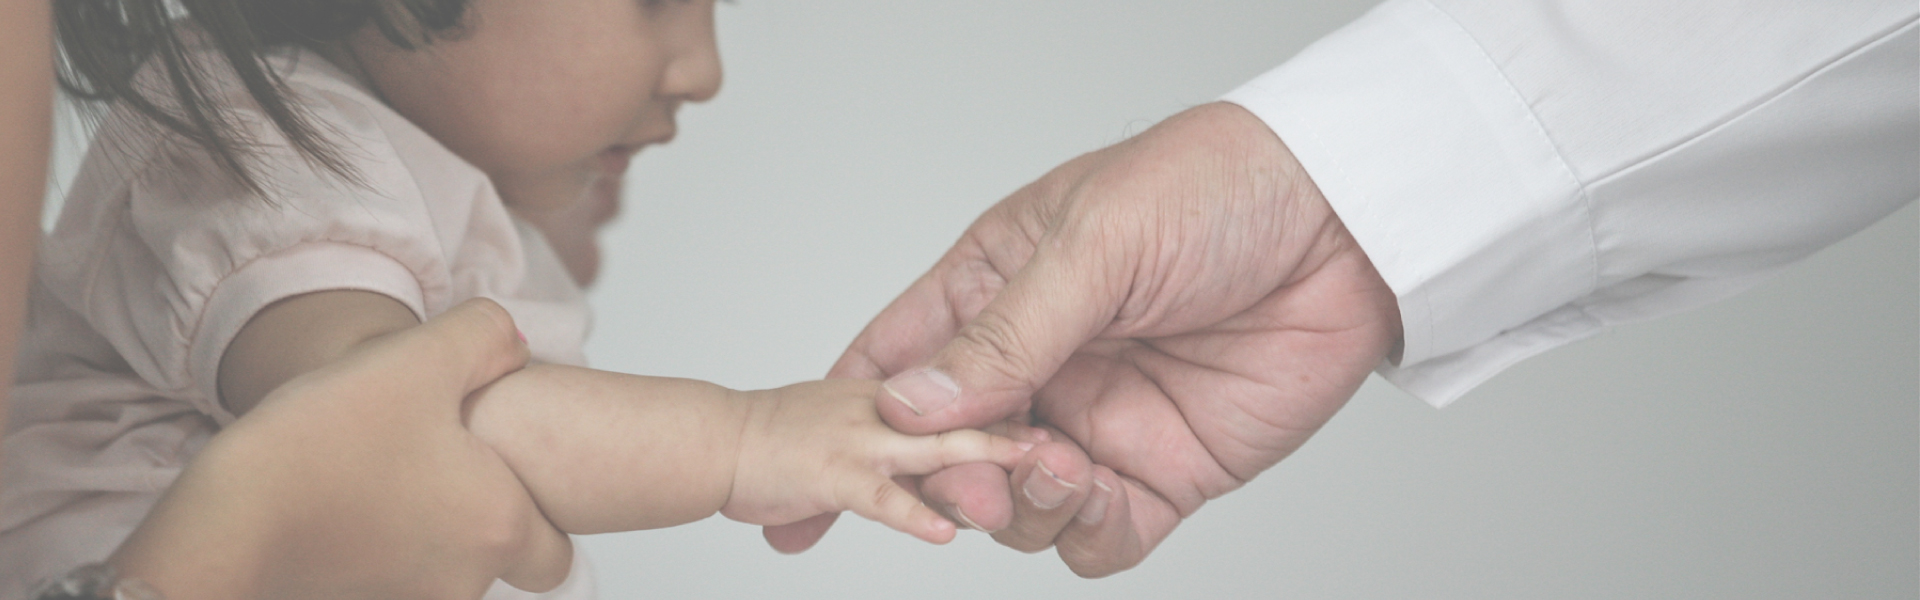 Image of doctor reaching out to a child's hand and touching